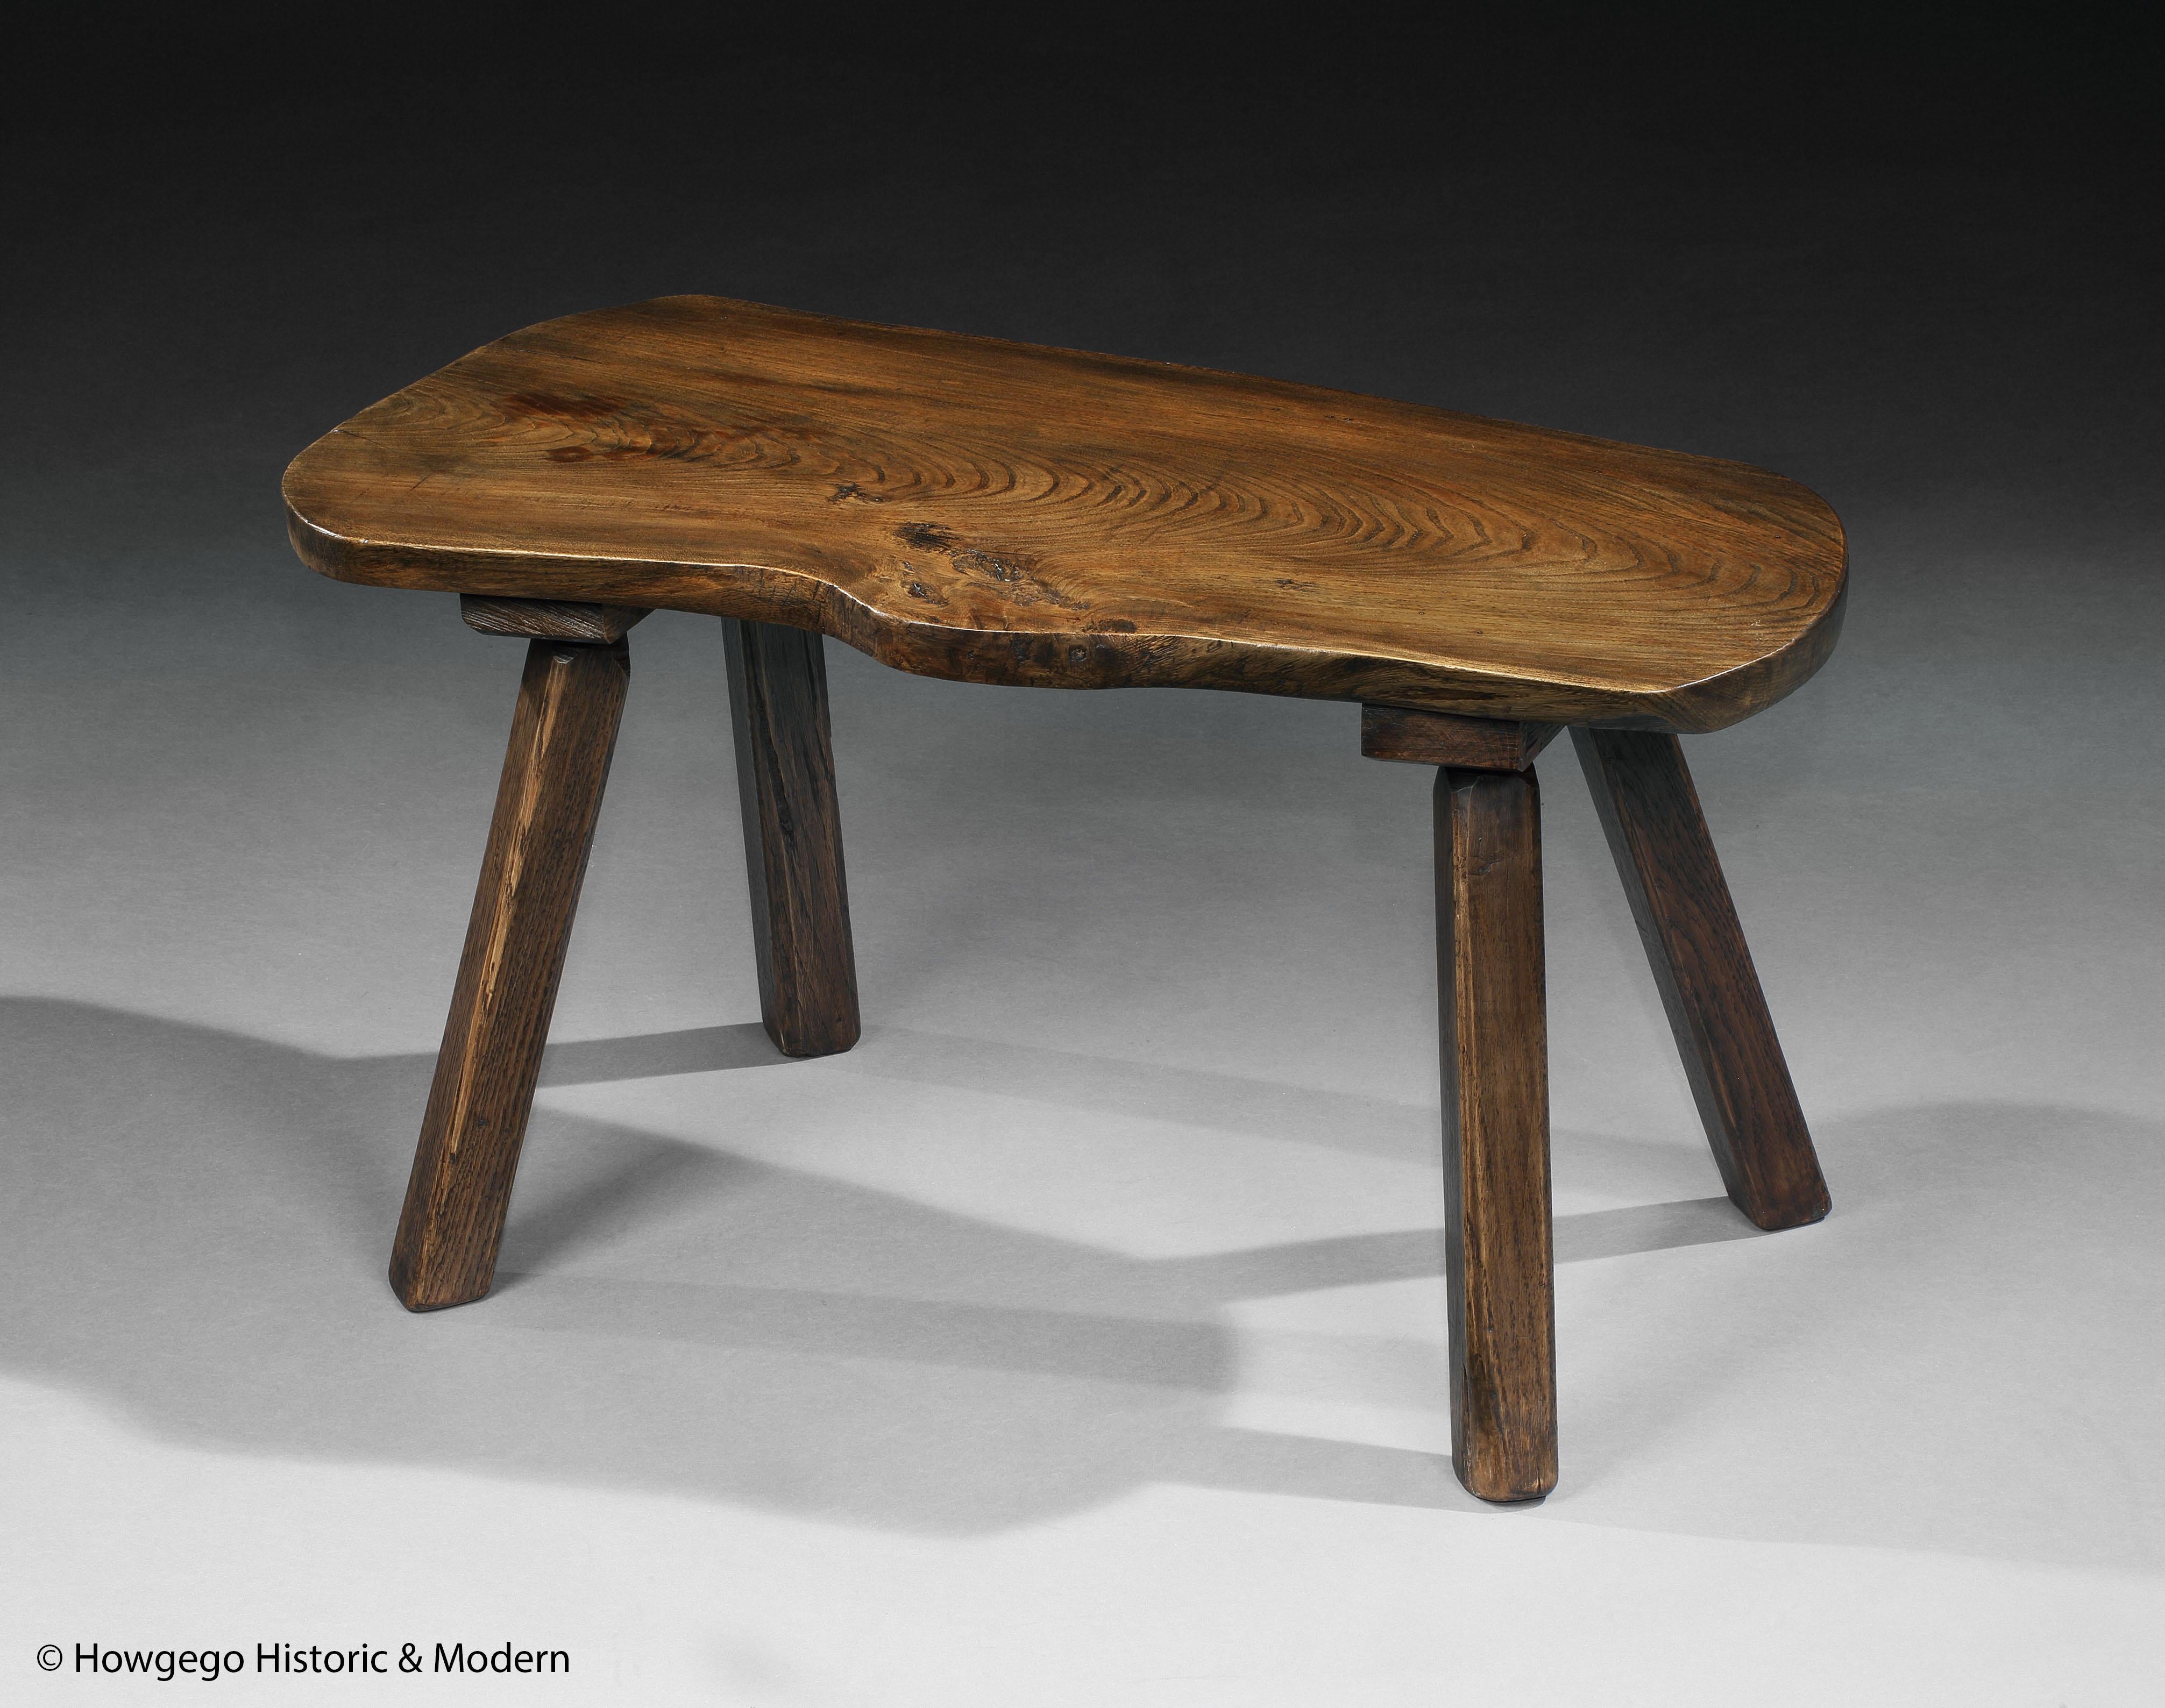 - Sculptural table using the natural characteristics and form of the elm as the inspiration to create furniture that transcends purpose into organic art.
- The patina and wear that have developed with time add to the raw, organic character of this